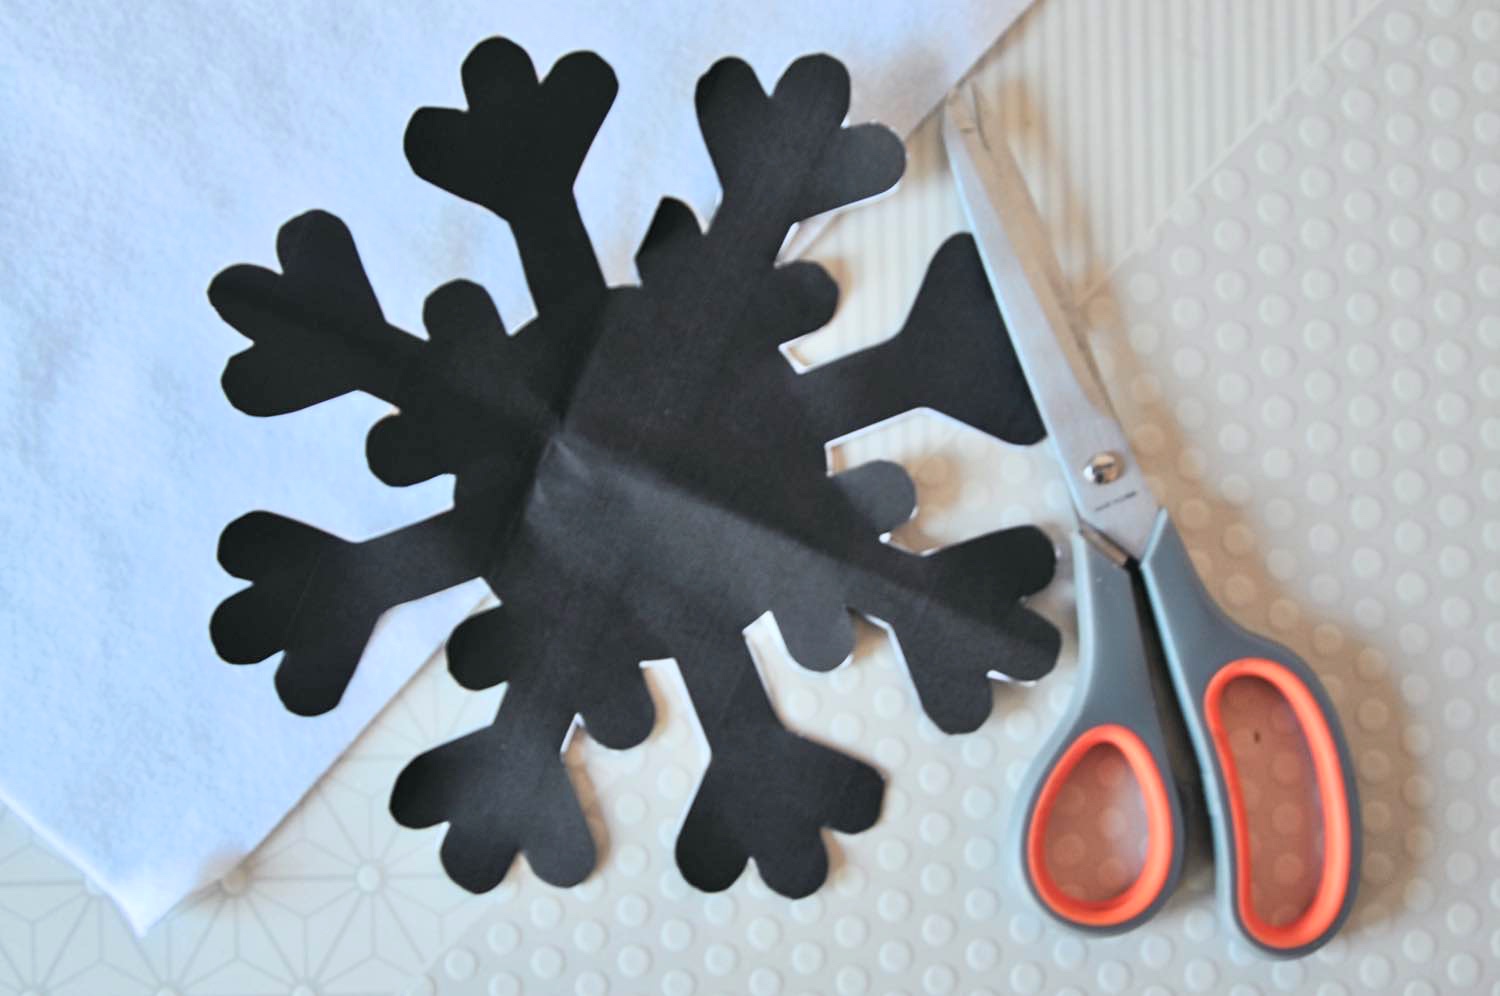 cut out the snowflake template diy pop shop america_bright